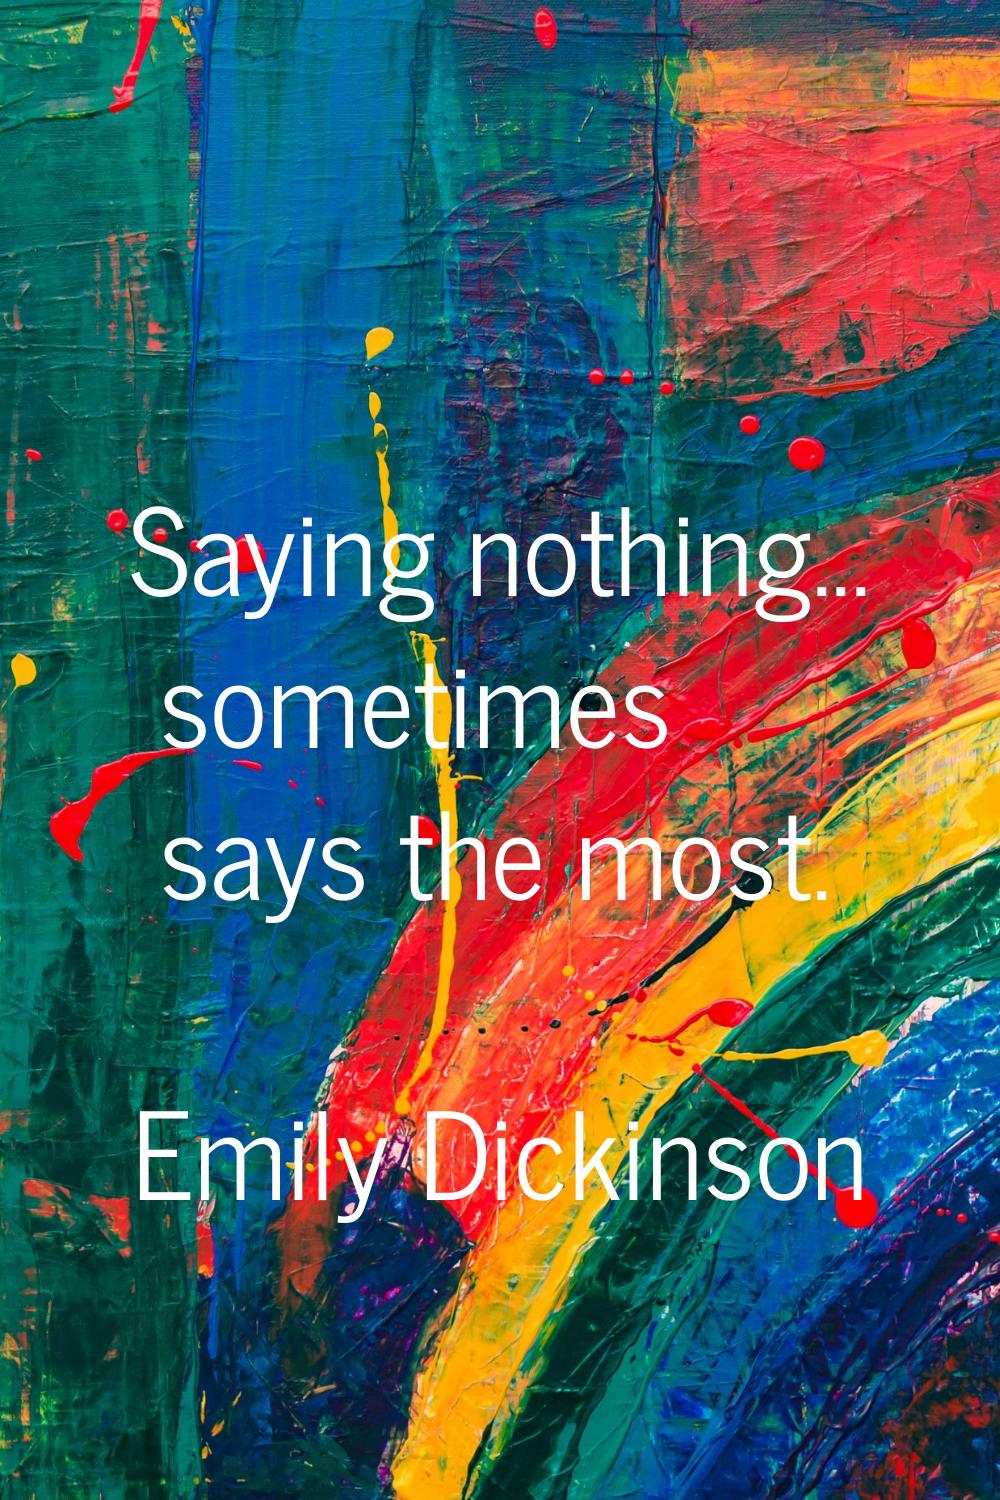 Saying nothing... sometimes says the most.